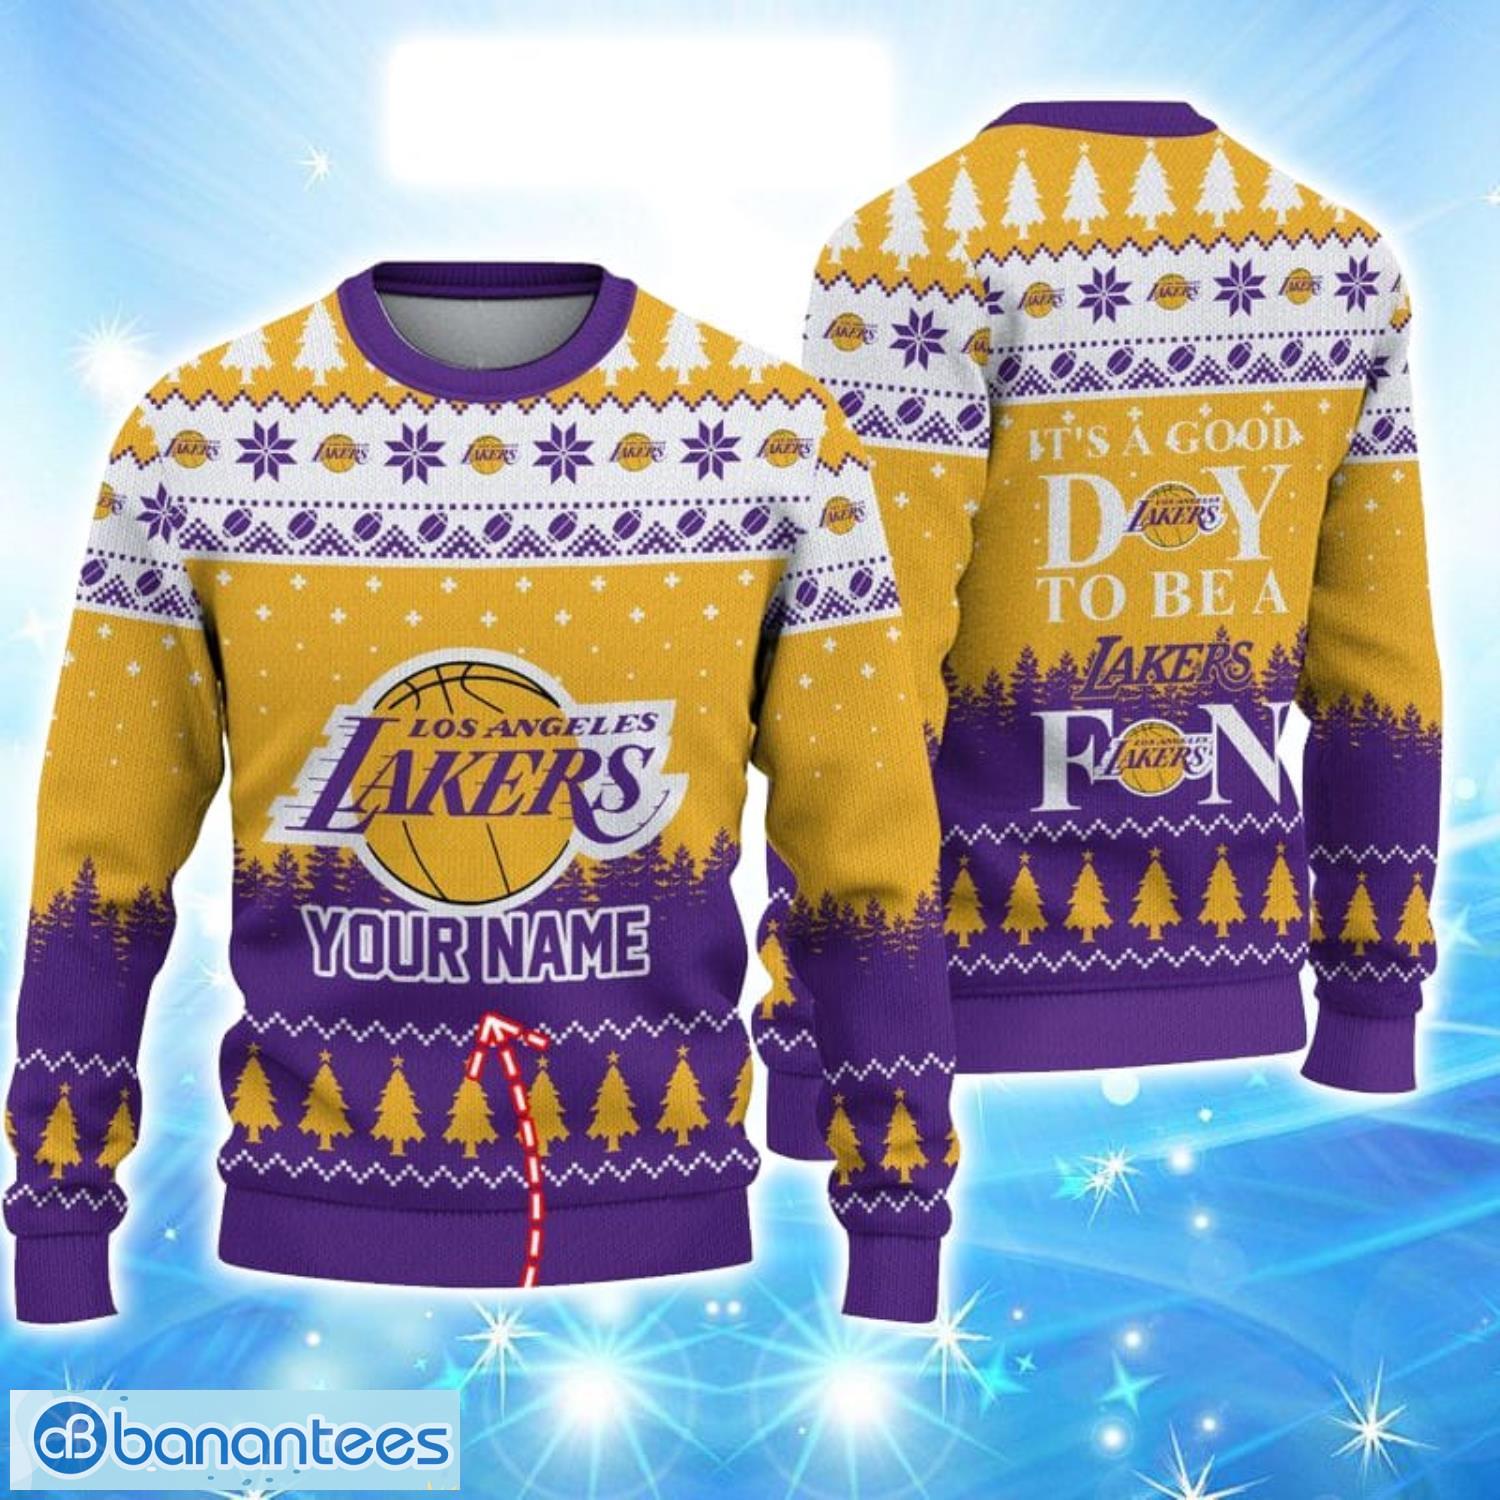 It's A Good Day To Be A Los Angeles Lakers Limited Edition Knitted